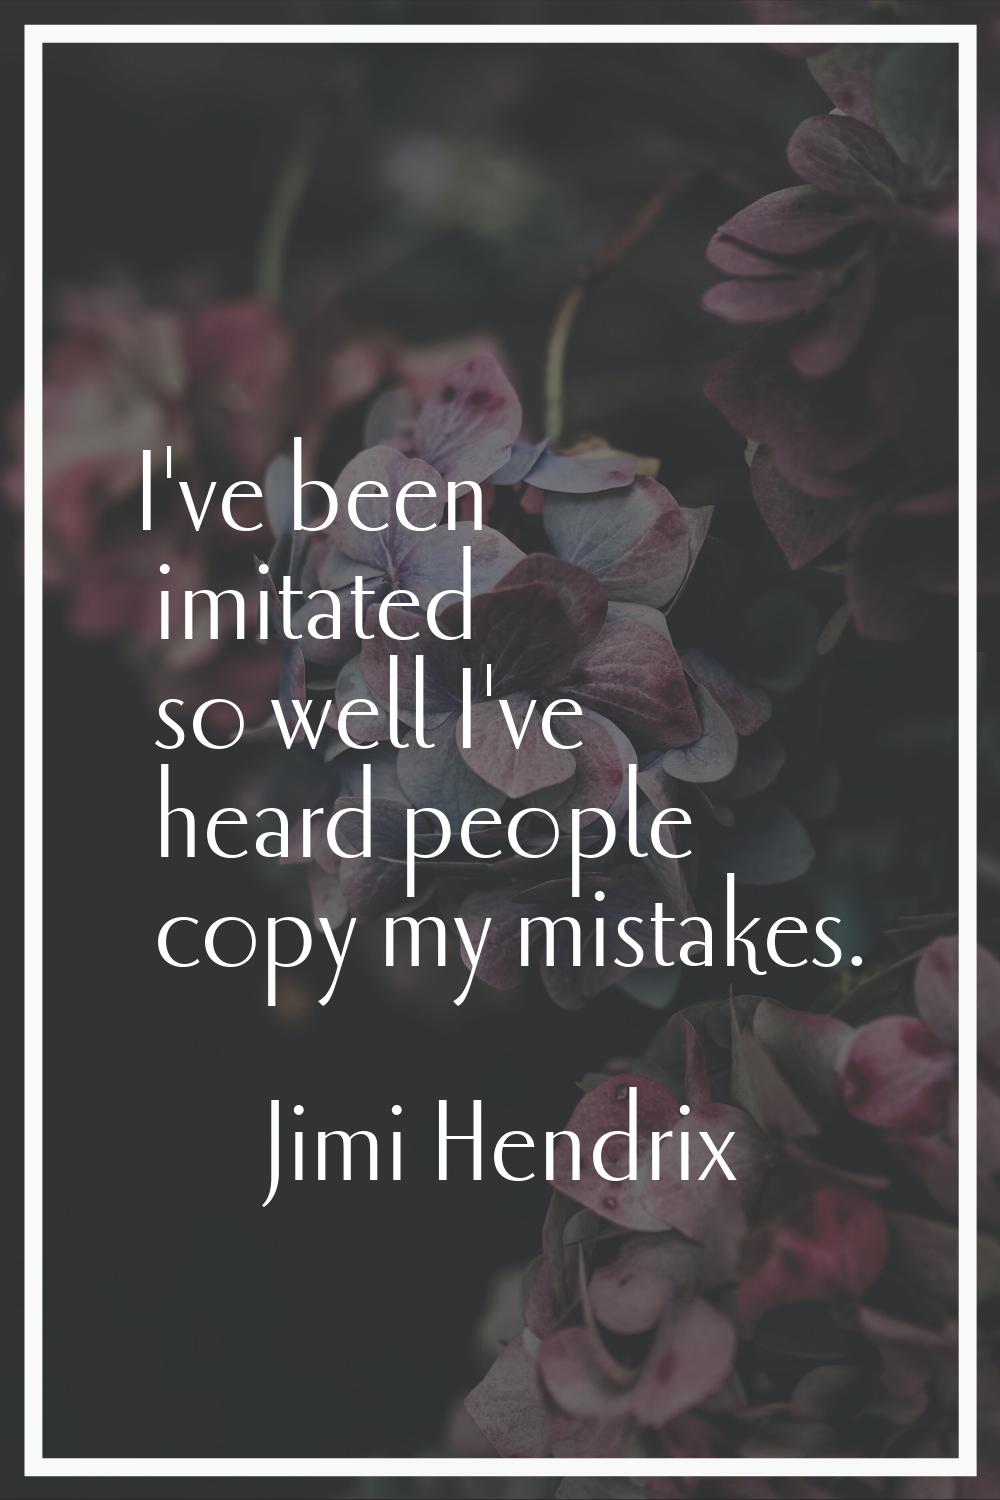 I've been imitated so well I've heard people copy my mistakes.